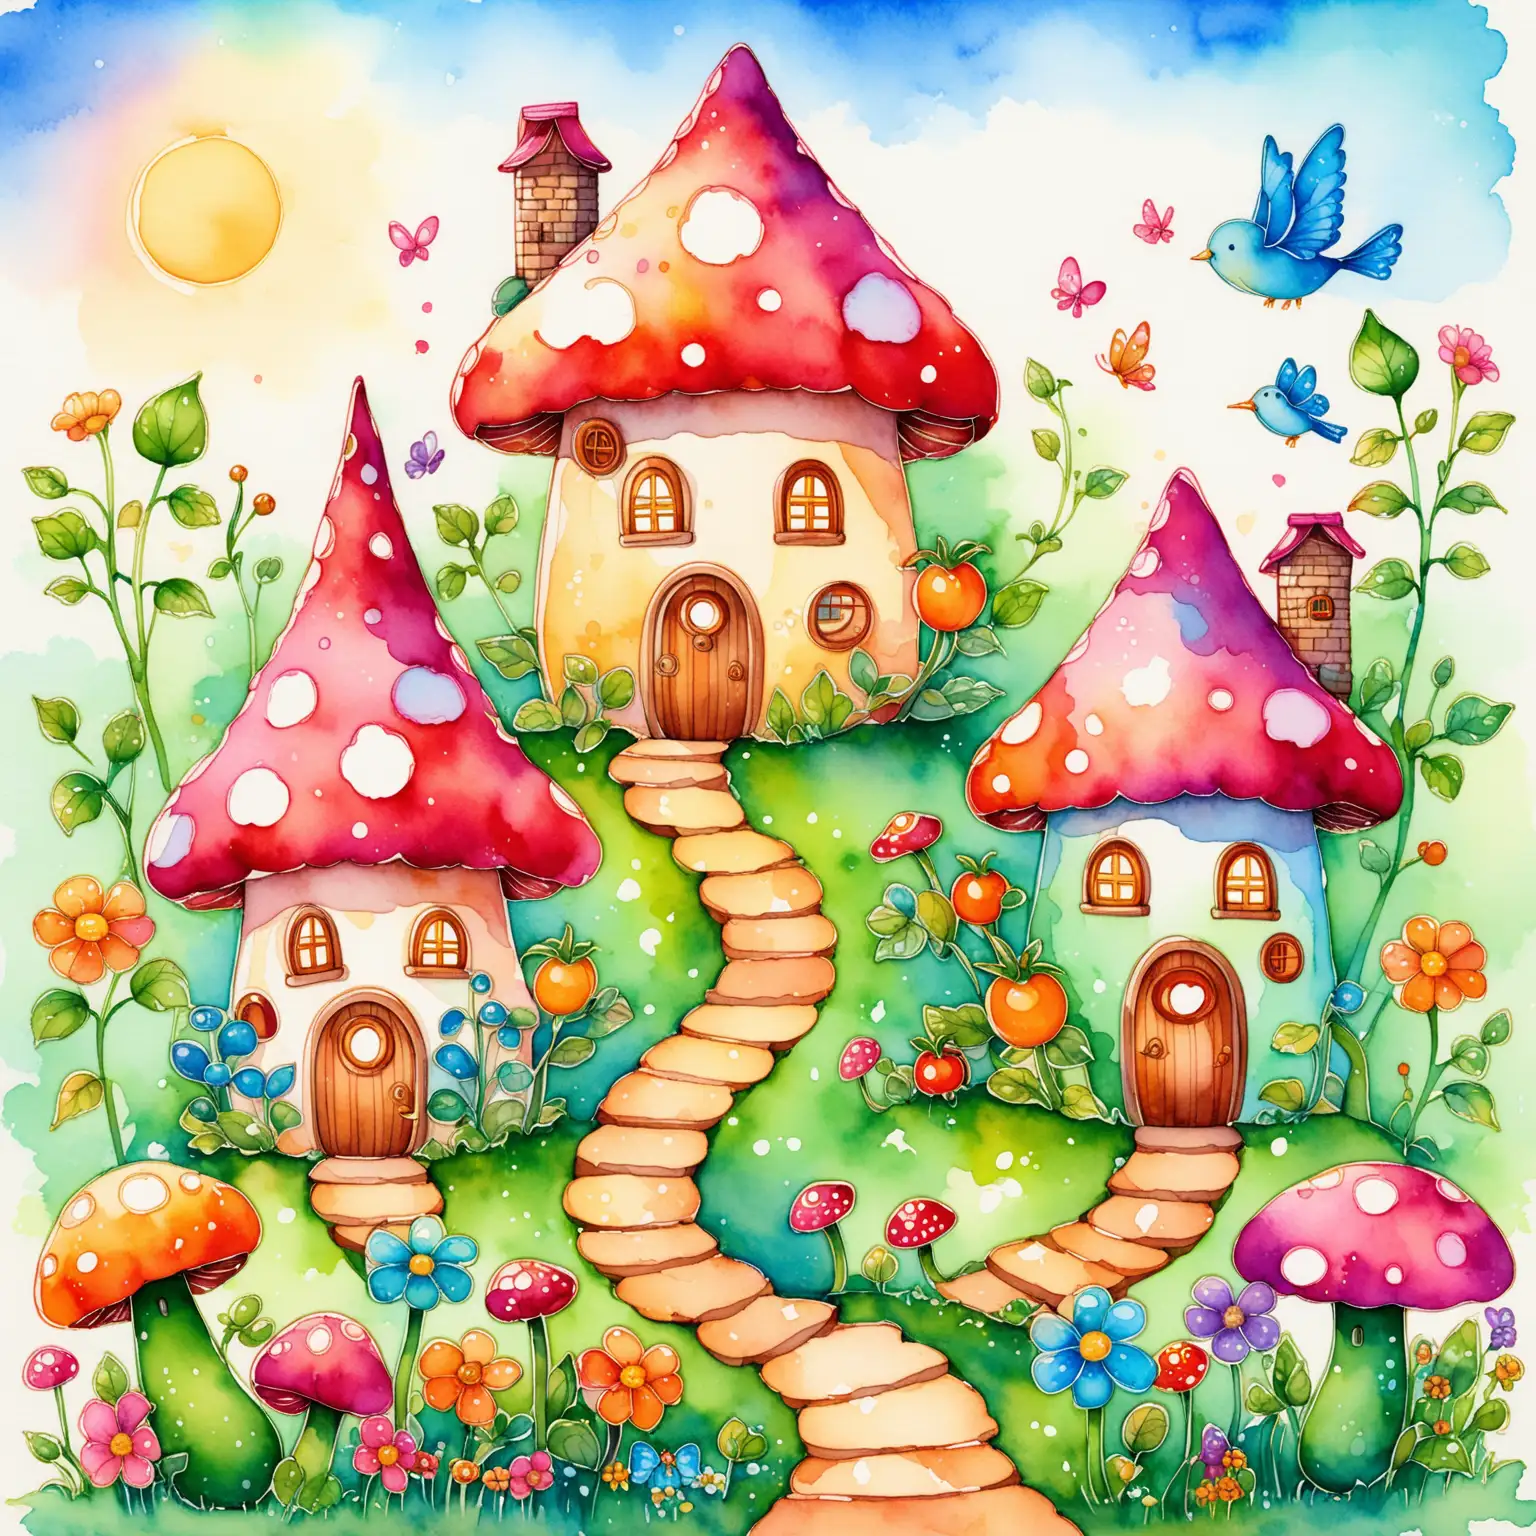 The image depicts three whimsical houses on a garden in a colorful  cartoon-like style, The leftmost house is a mushroom house with a ladder surrounded by flowers and a caterpillar looks out the  window, the middle one is a cucumber house with pink roof and a mouse at a  heart door, a cartoon bunny is watering a garden next to the rightmost house made of a carrot, tomato plant shaped like a house with a bird, mushrooms and butterflies, sunny day, whimsical folk art style, wet watercolor alcohol ink style, hdr-uhd
